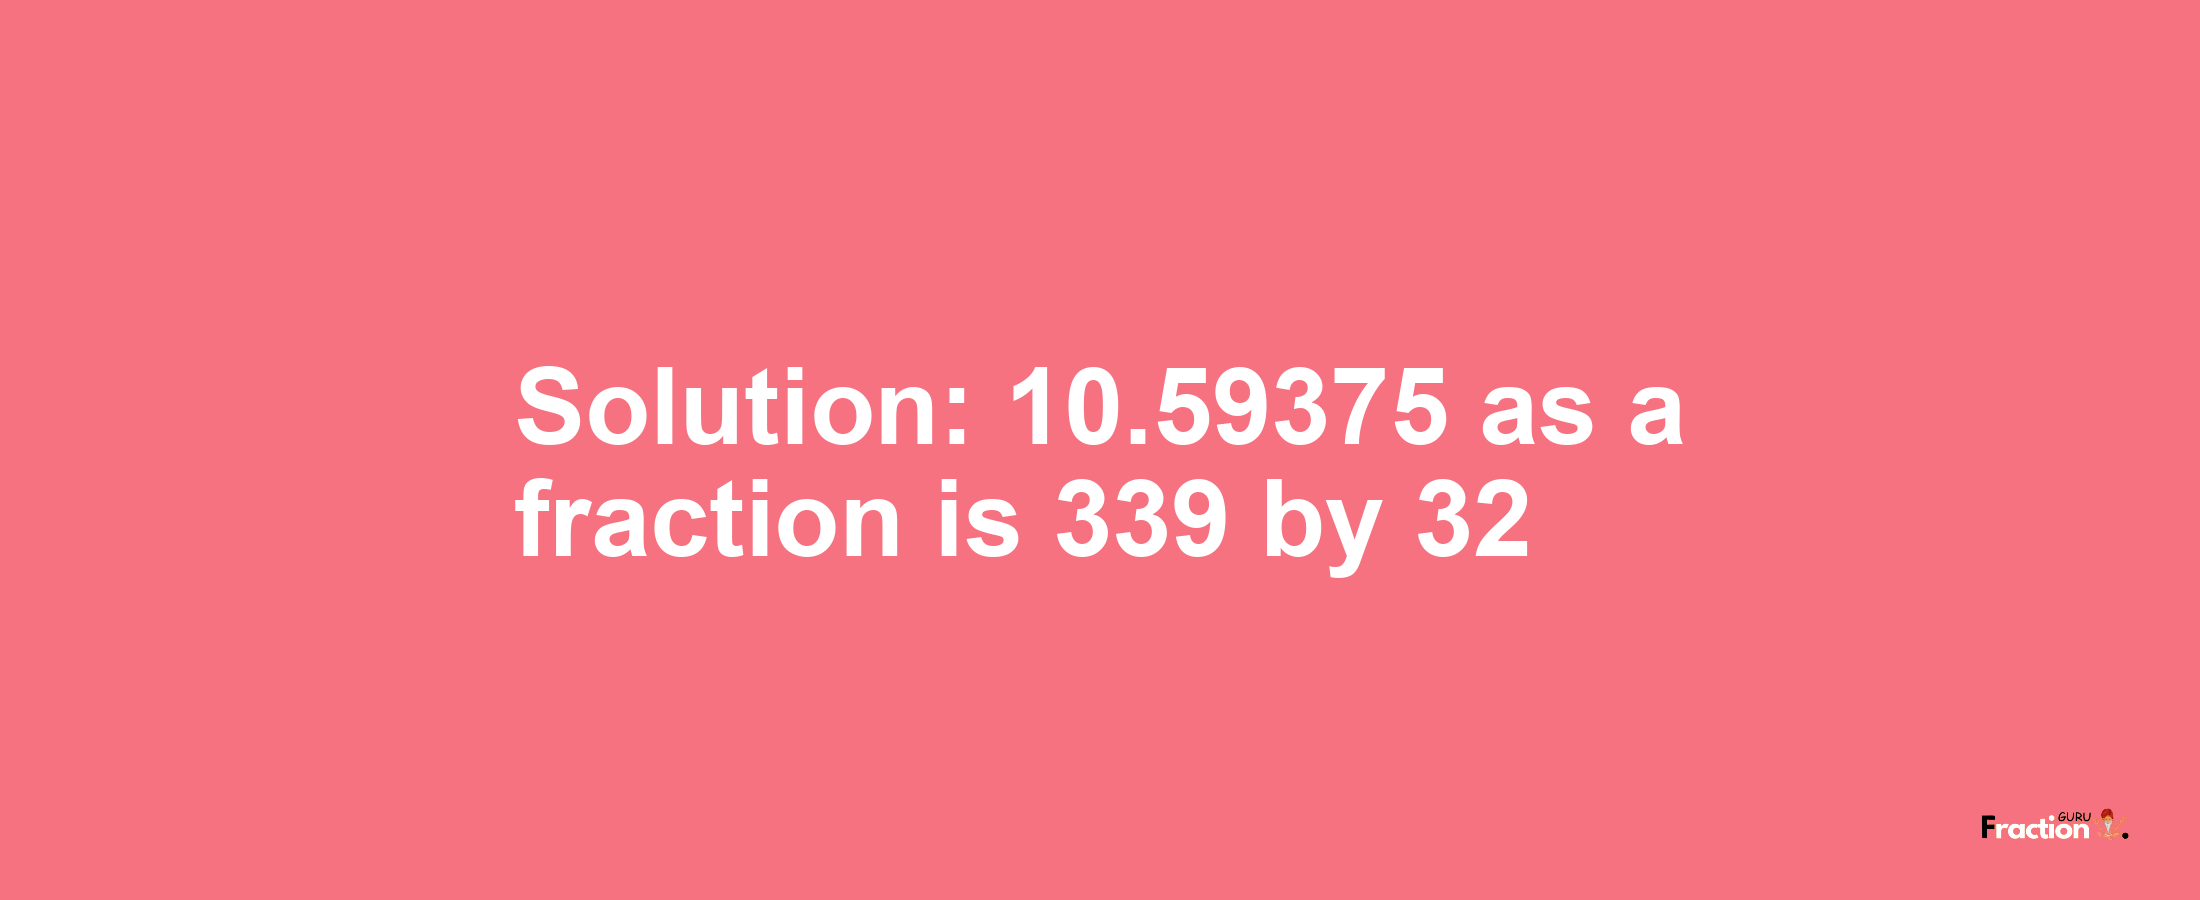 Solution:10.59375 as a fraction is 339/32